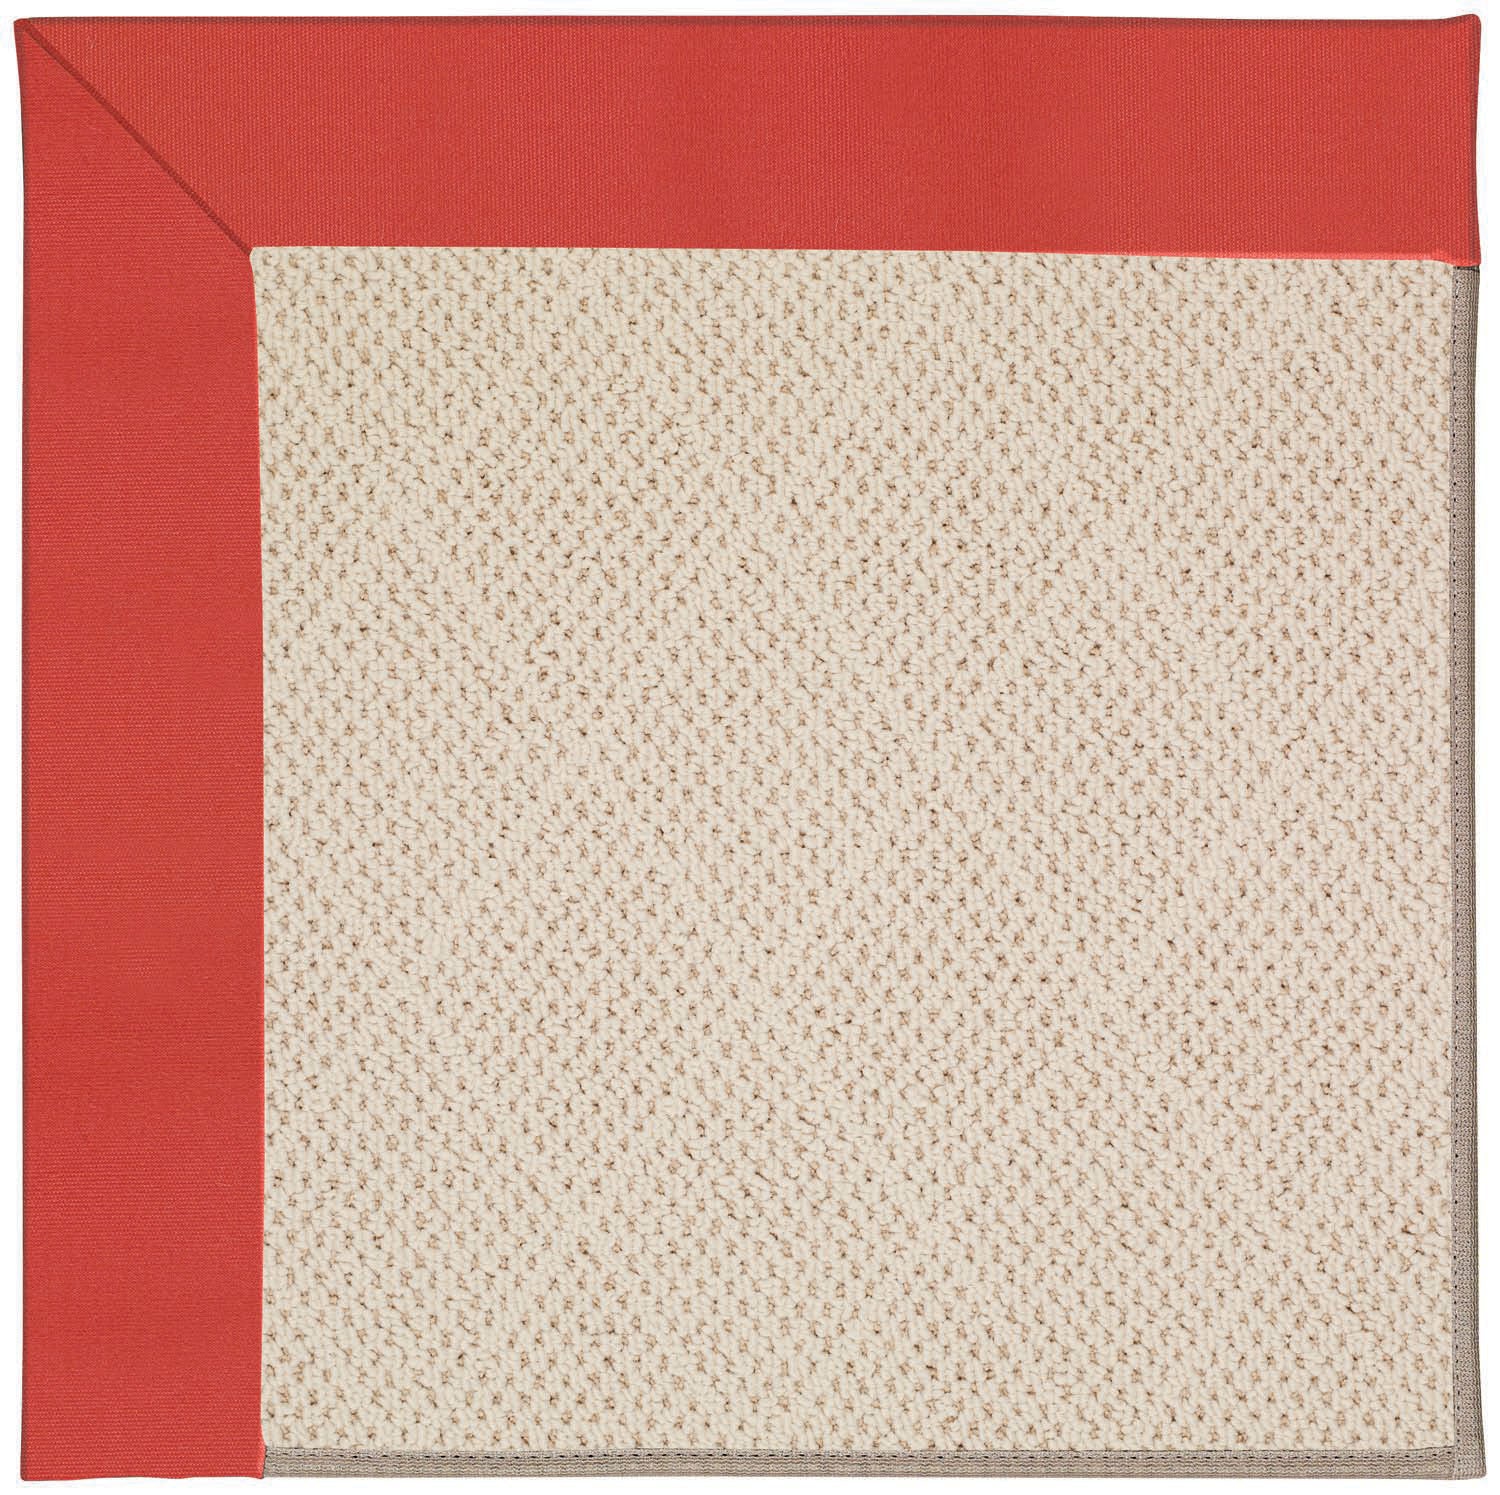 Capel Zoe-White Wicker 1993 Sunset Red Area Rug main image